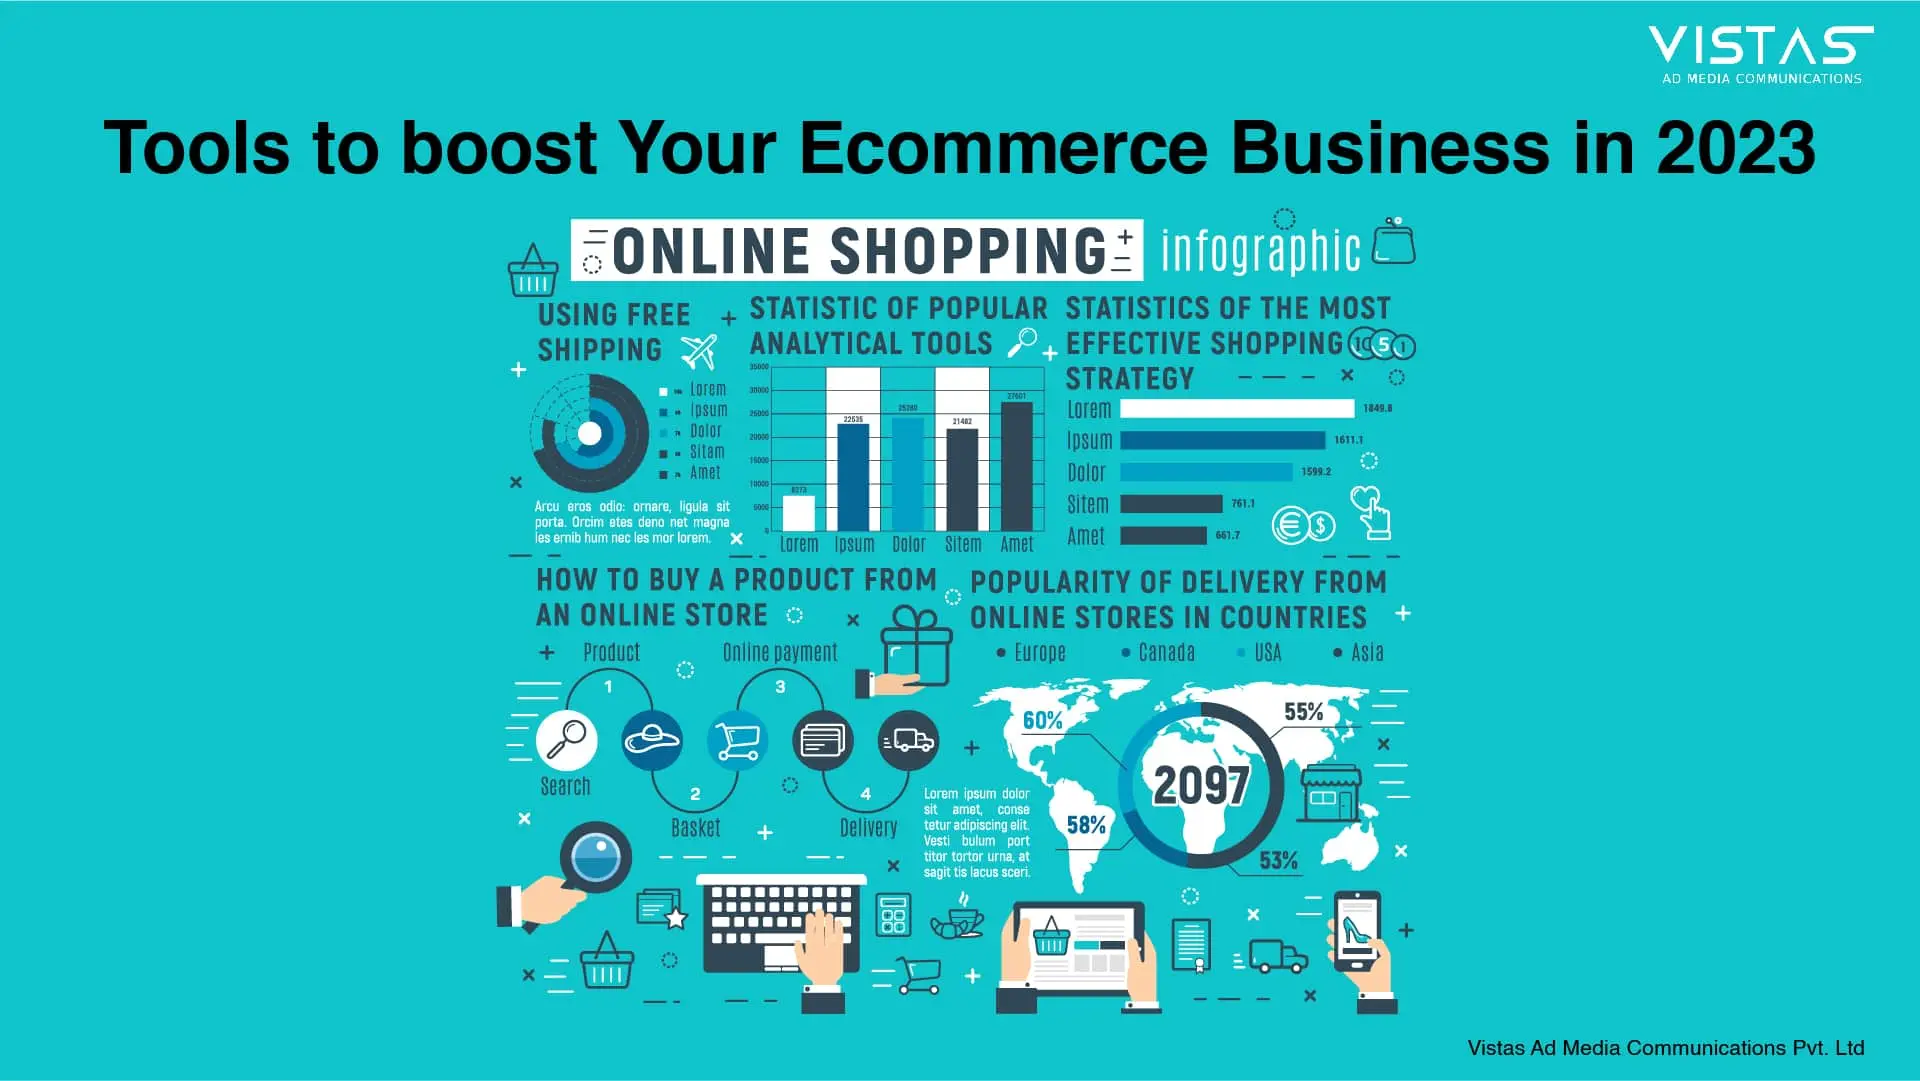 Boost eCommerce Business in 2023